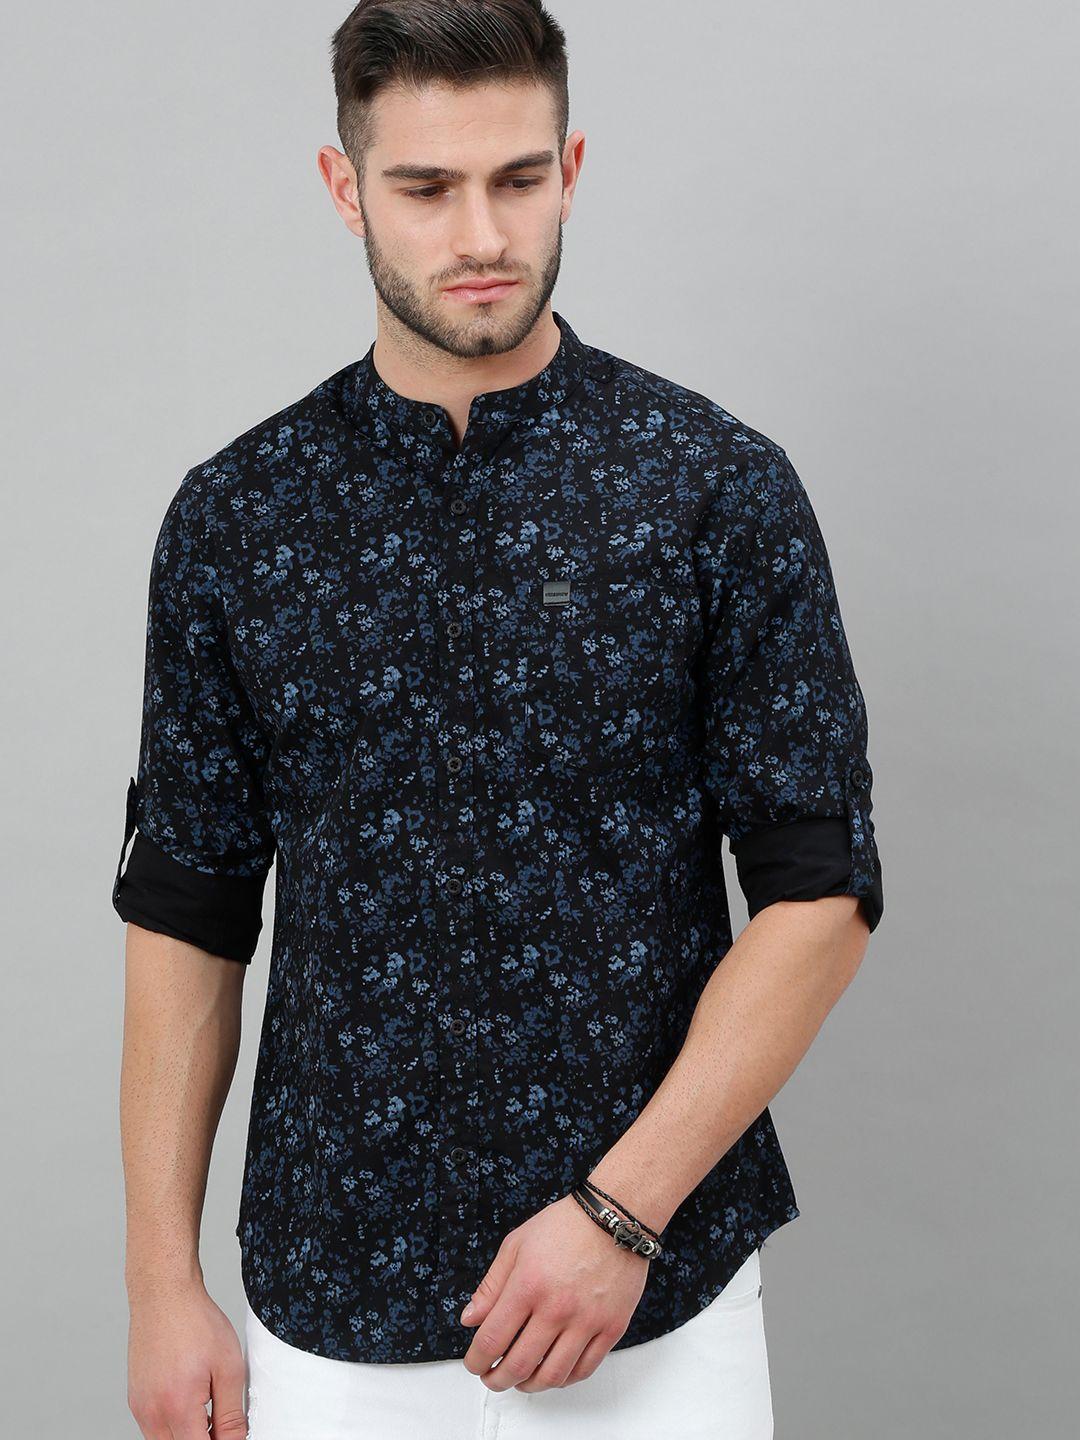 here&now men black slim fit floral printed cotton casual shirt